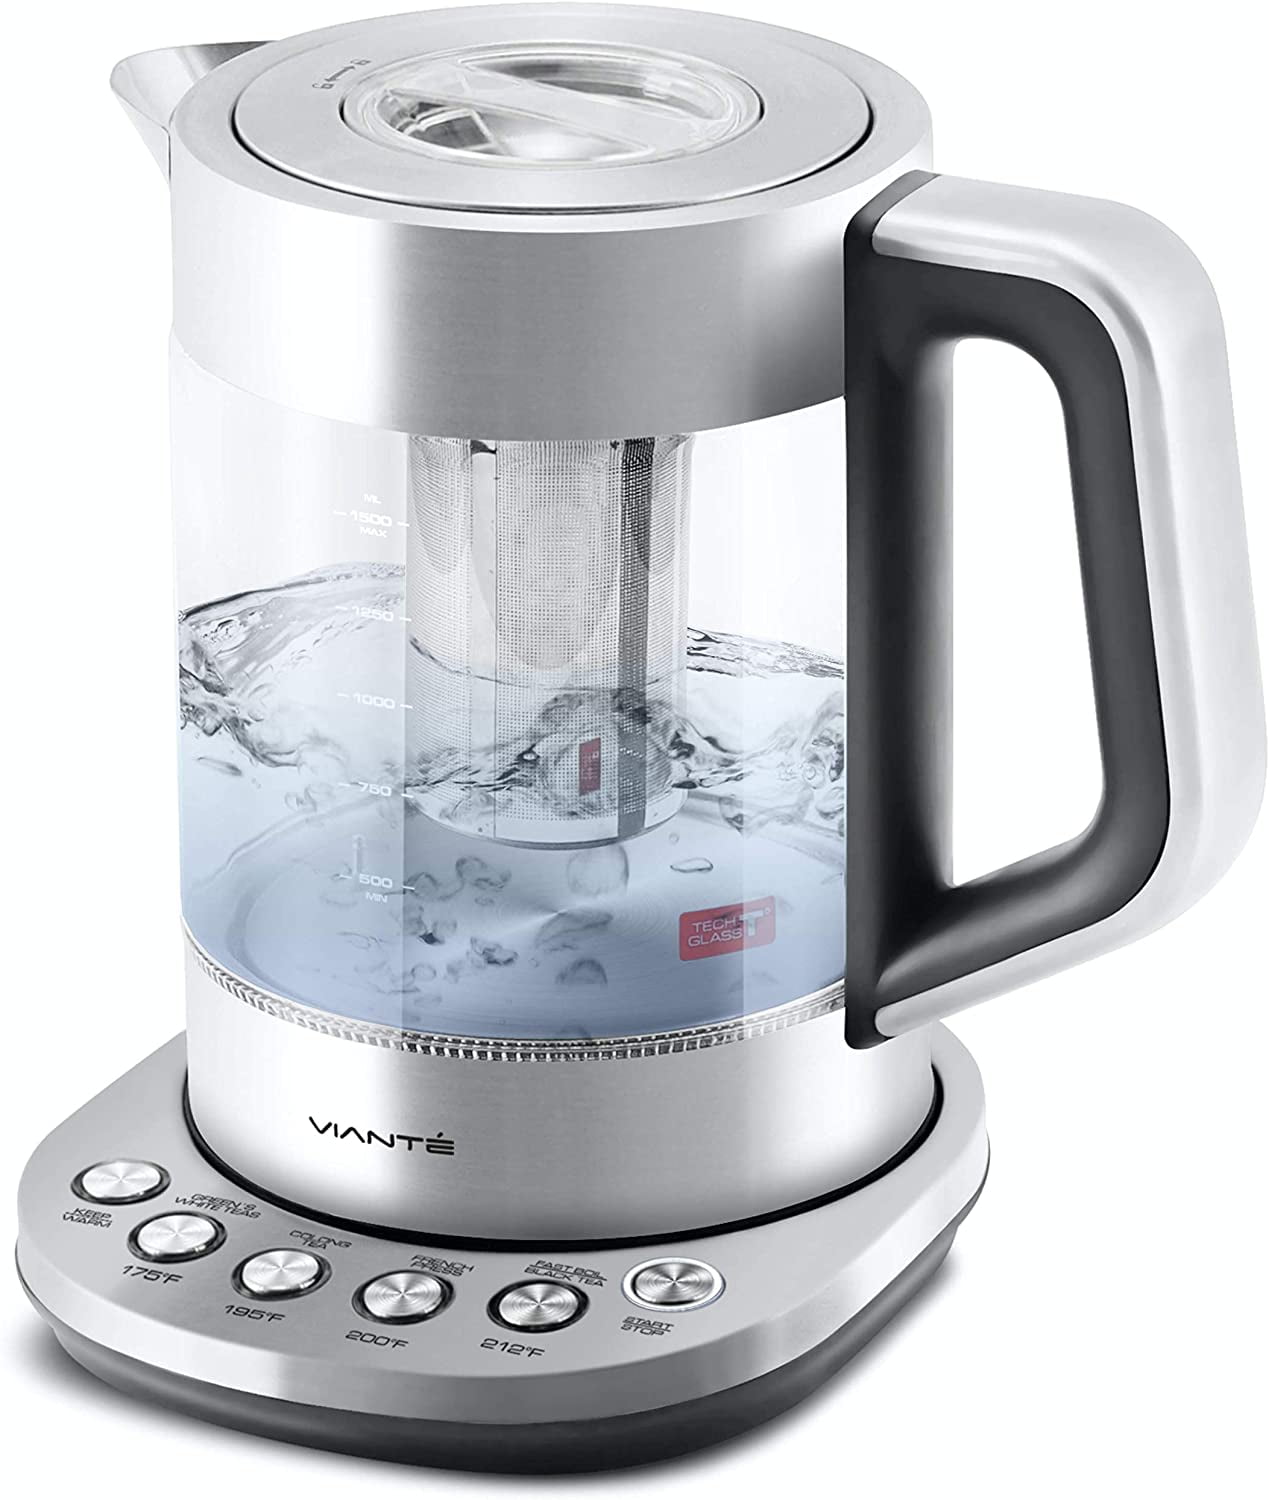 Vianté Hot Tea Maker Electric Glass Kettle with tea infuser and temperature  control. Automatic Shut off. Brewing Programs for your favorite teas and  Coffee. Stainless Steel